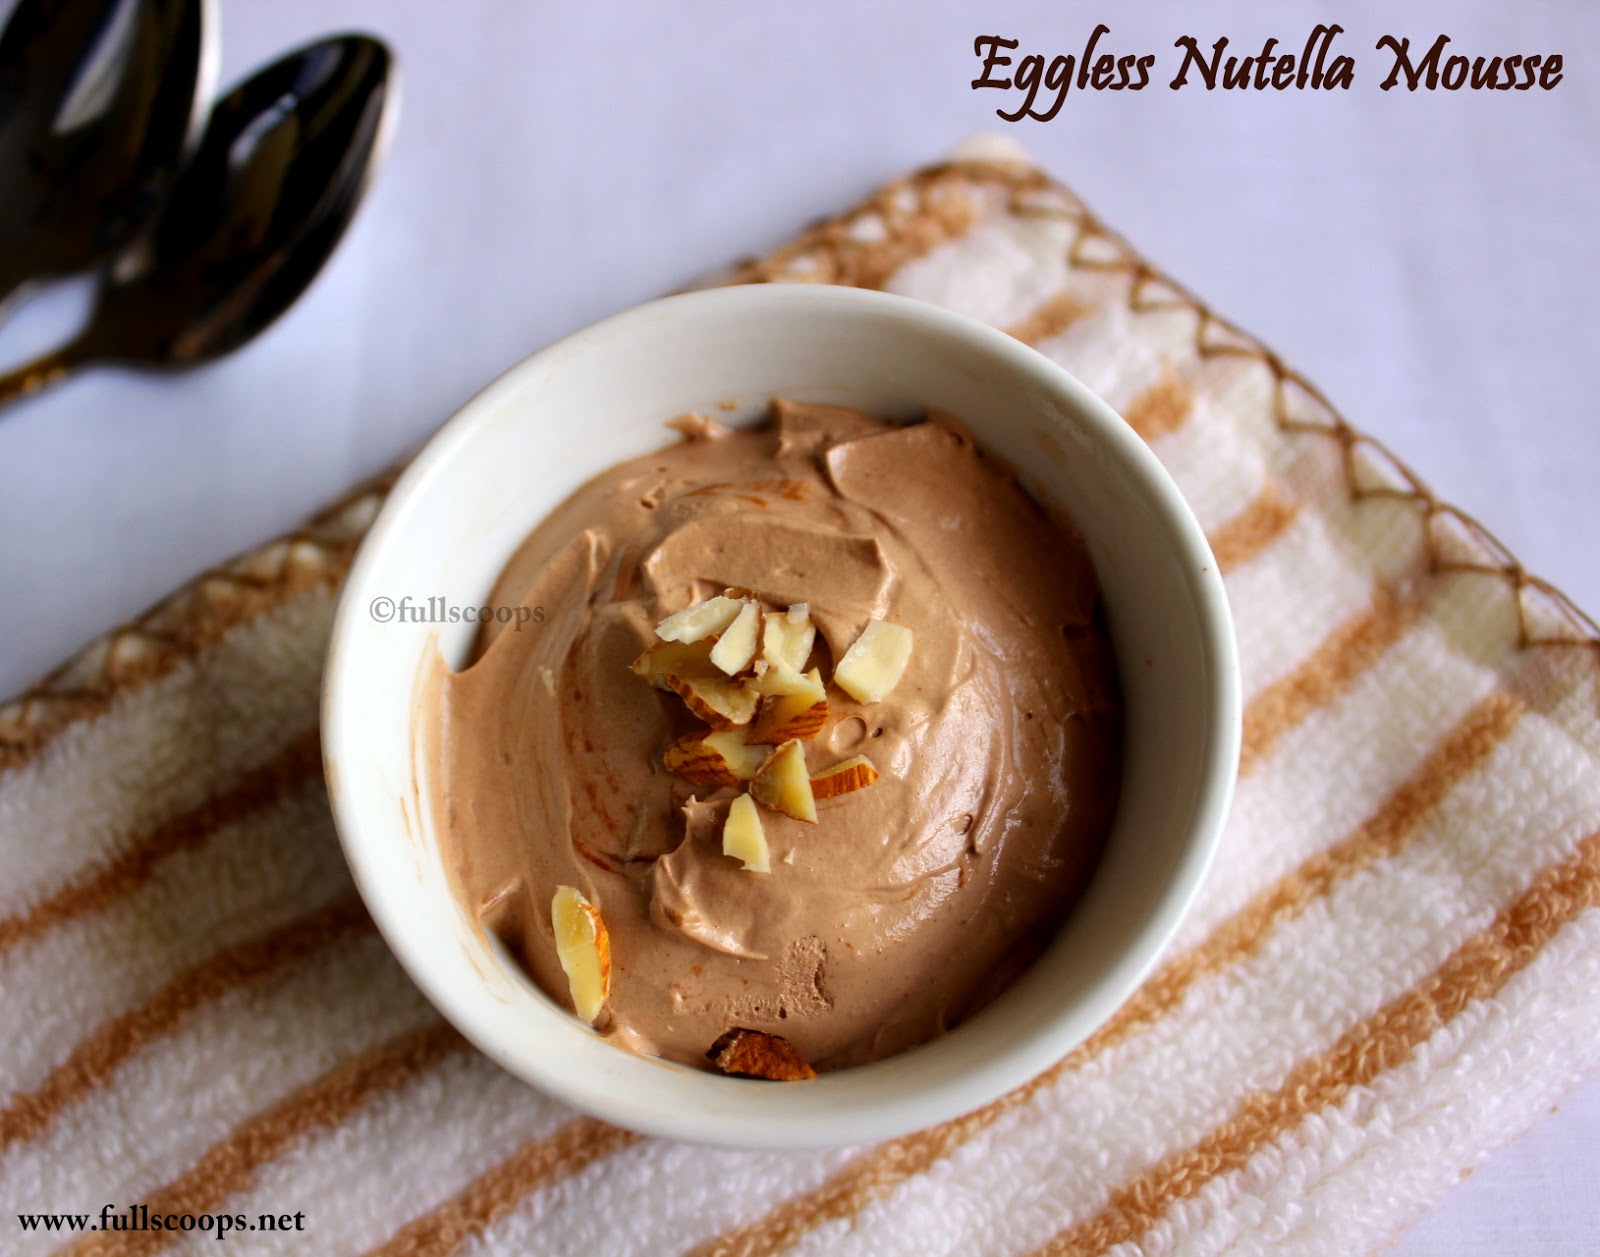 Eggless Nutella Mousse